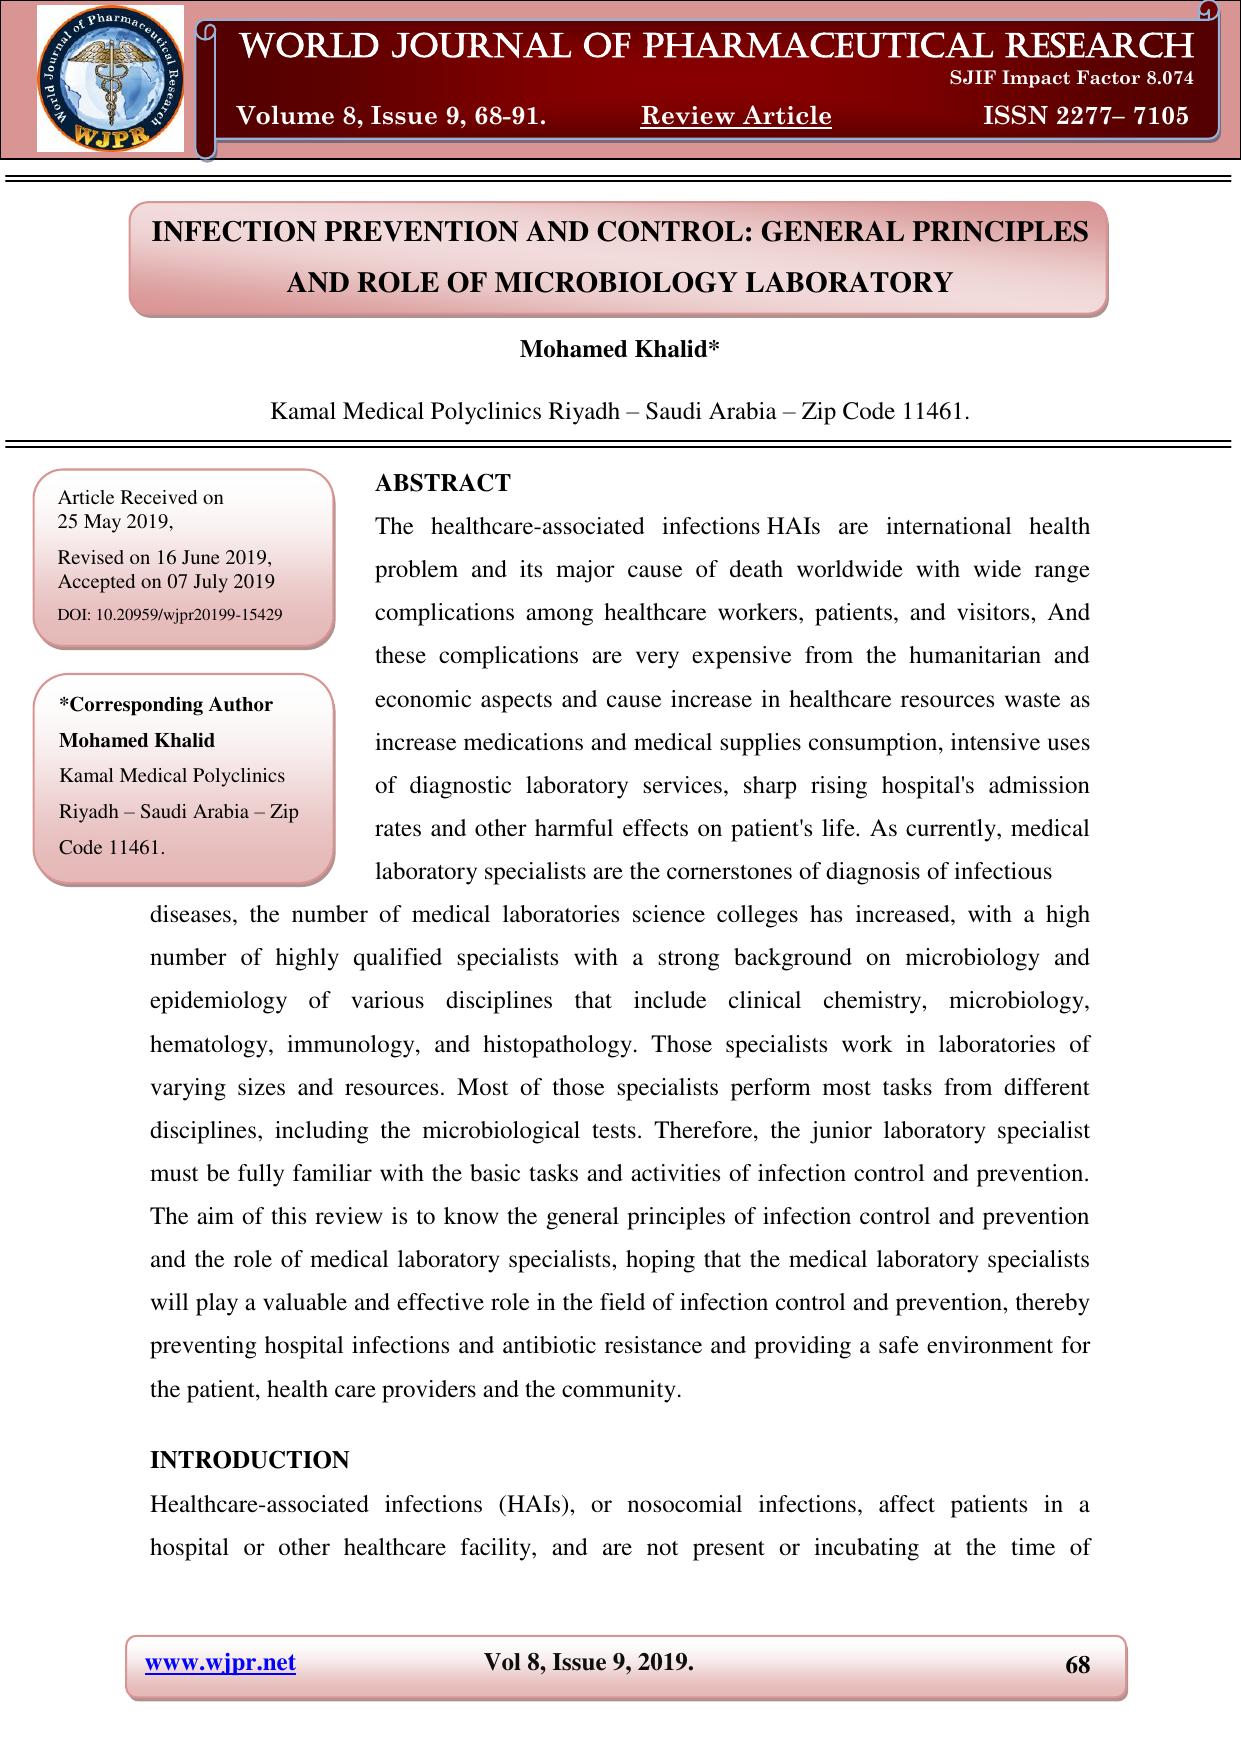 INFECTION PREVENTION AND CONTROL GENERAL PRINCIPLES AND ROLE OF MICROBIOLOGY LABORATORY 2019